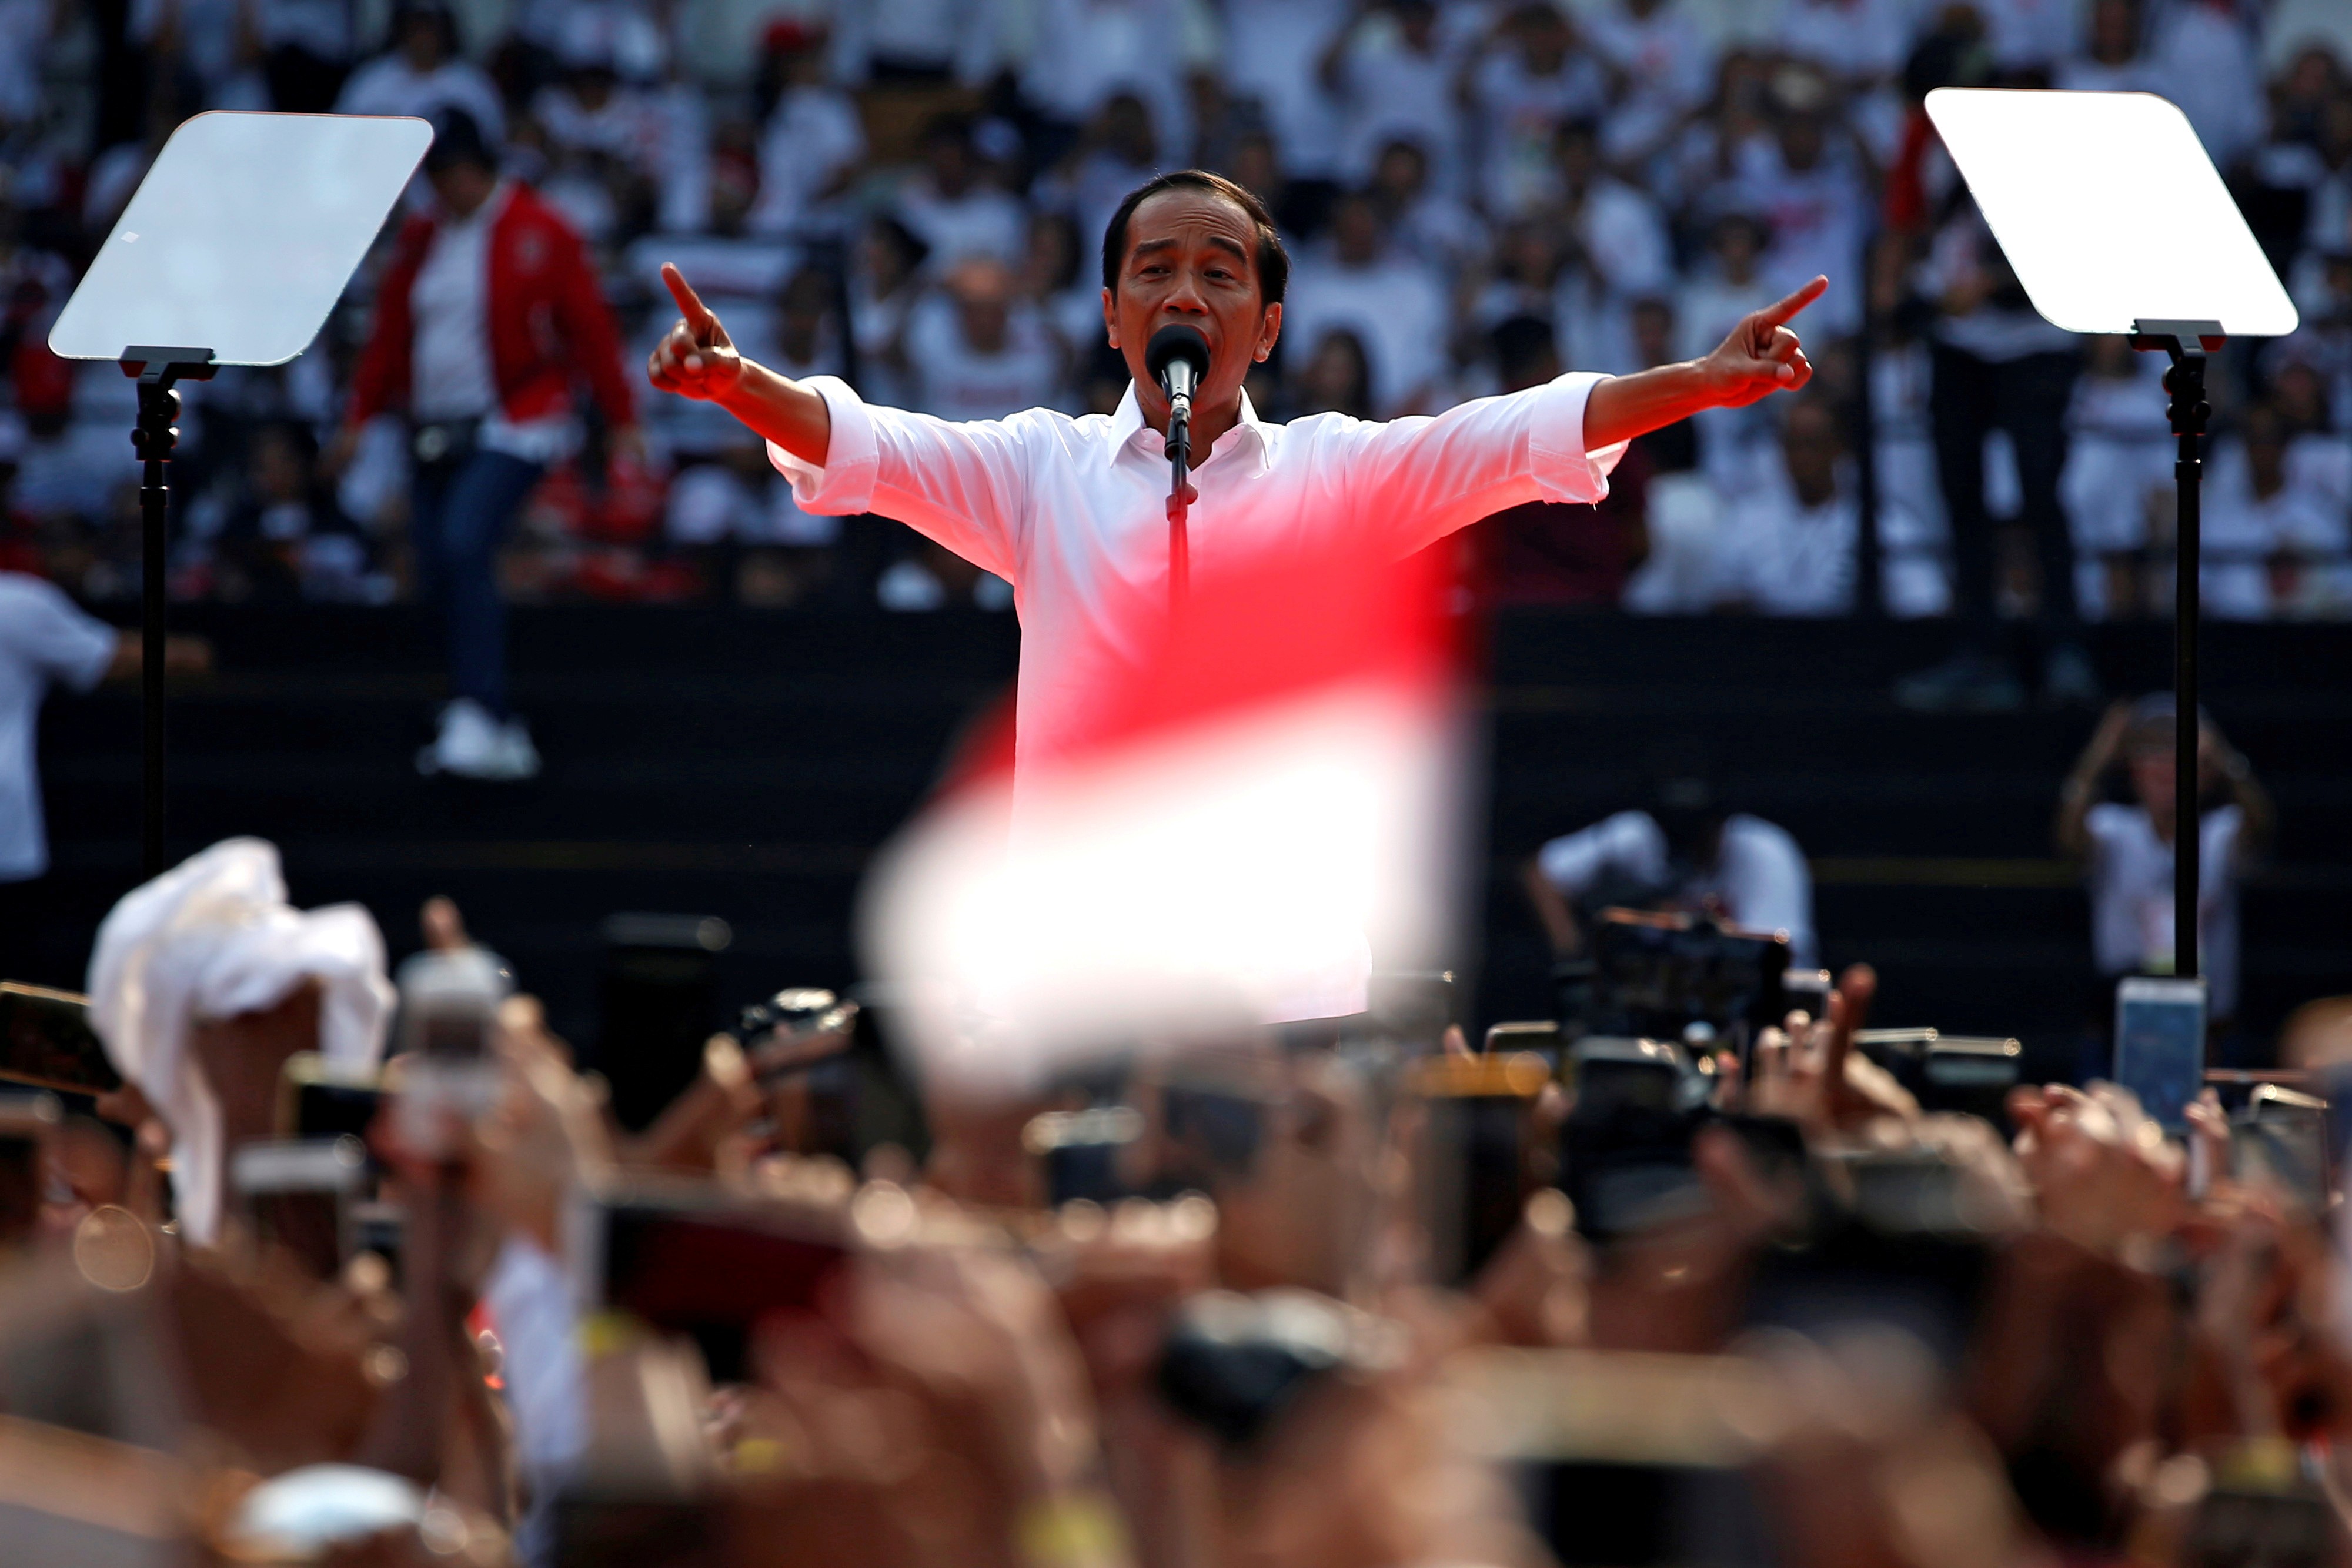 Indonesia's incumbent President Joko Widodo gestures during a campaign rally in Jakarta on April 13. Photo: Reuters